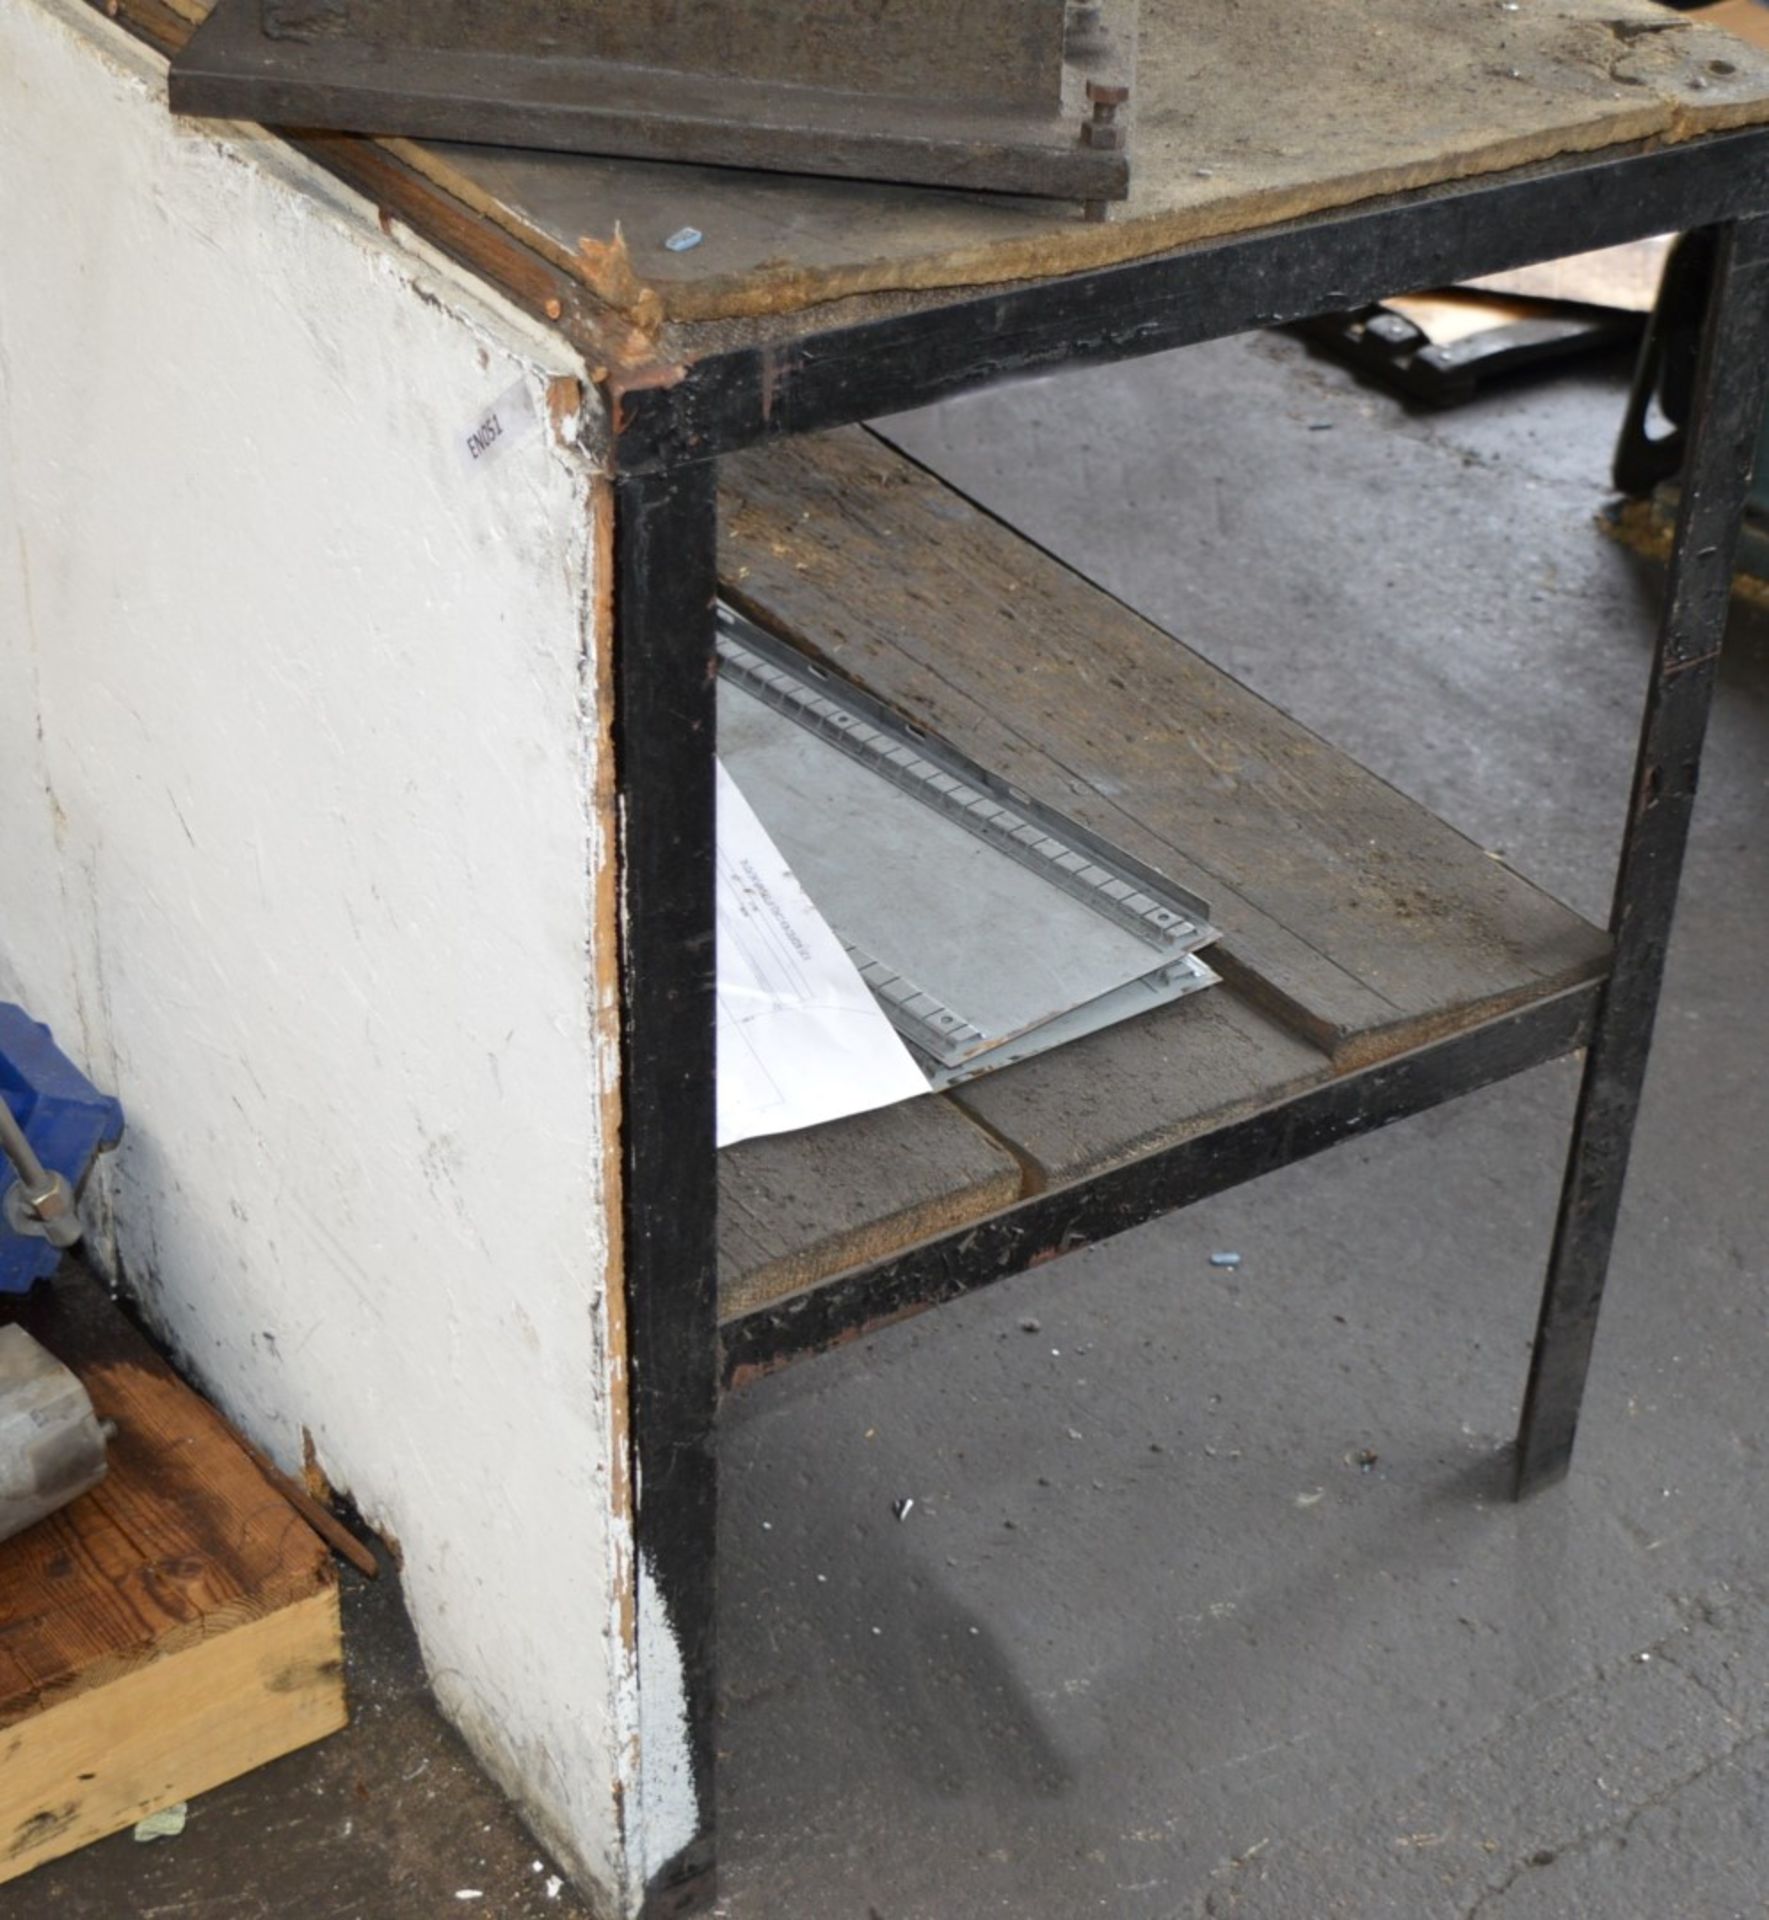 1 x Steel Workbench With Wooden Surfaces and Undershelf - CL202 - Ref EN051 - Location: Worcester - Image 3 of 3